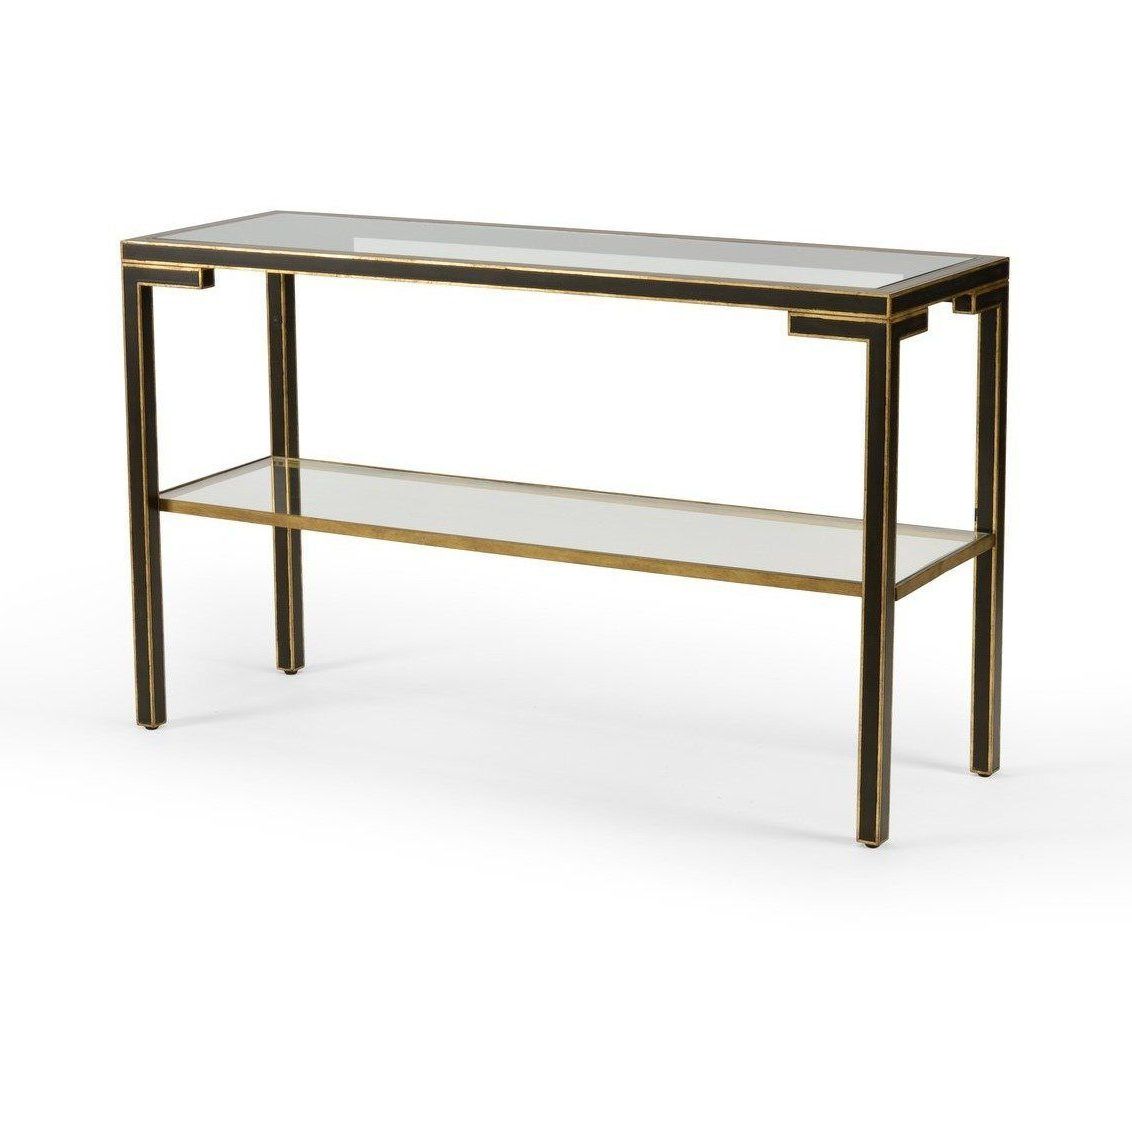 Chelsea House Decker Console 381874 | Products | Console, House, Chelsea For Parsons Grey Marble Top & Brass Base 48x16 Console Tables (Gallery 11 of 20)